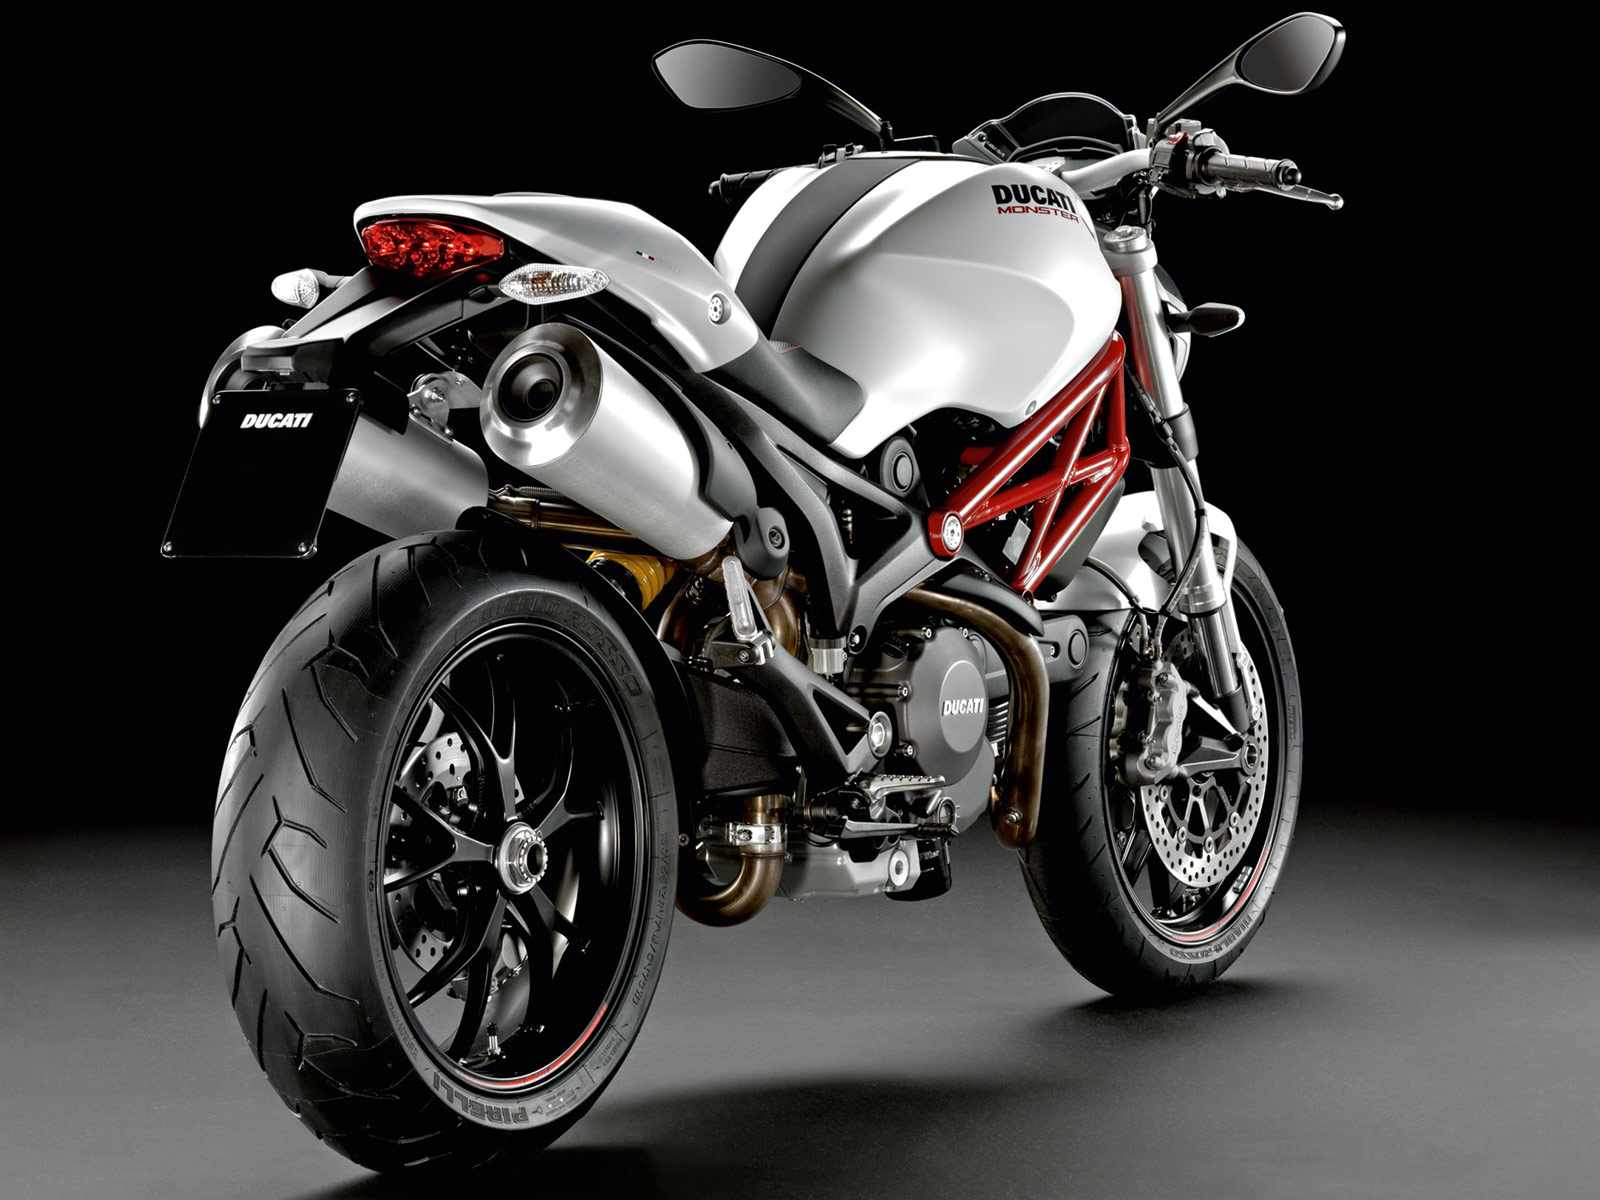 2013 Ducati Monster 796 motorcycle photos and insurance